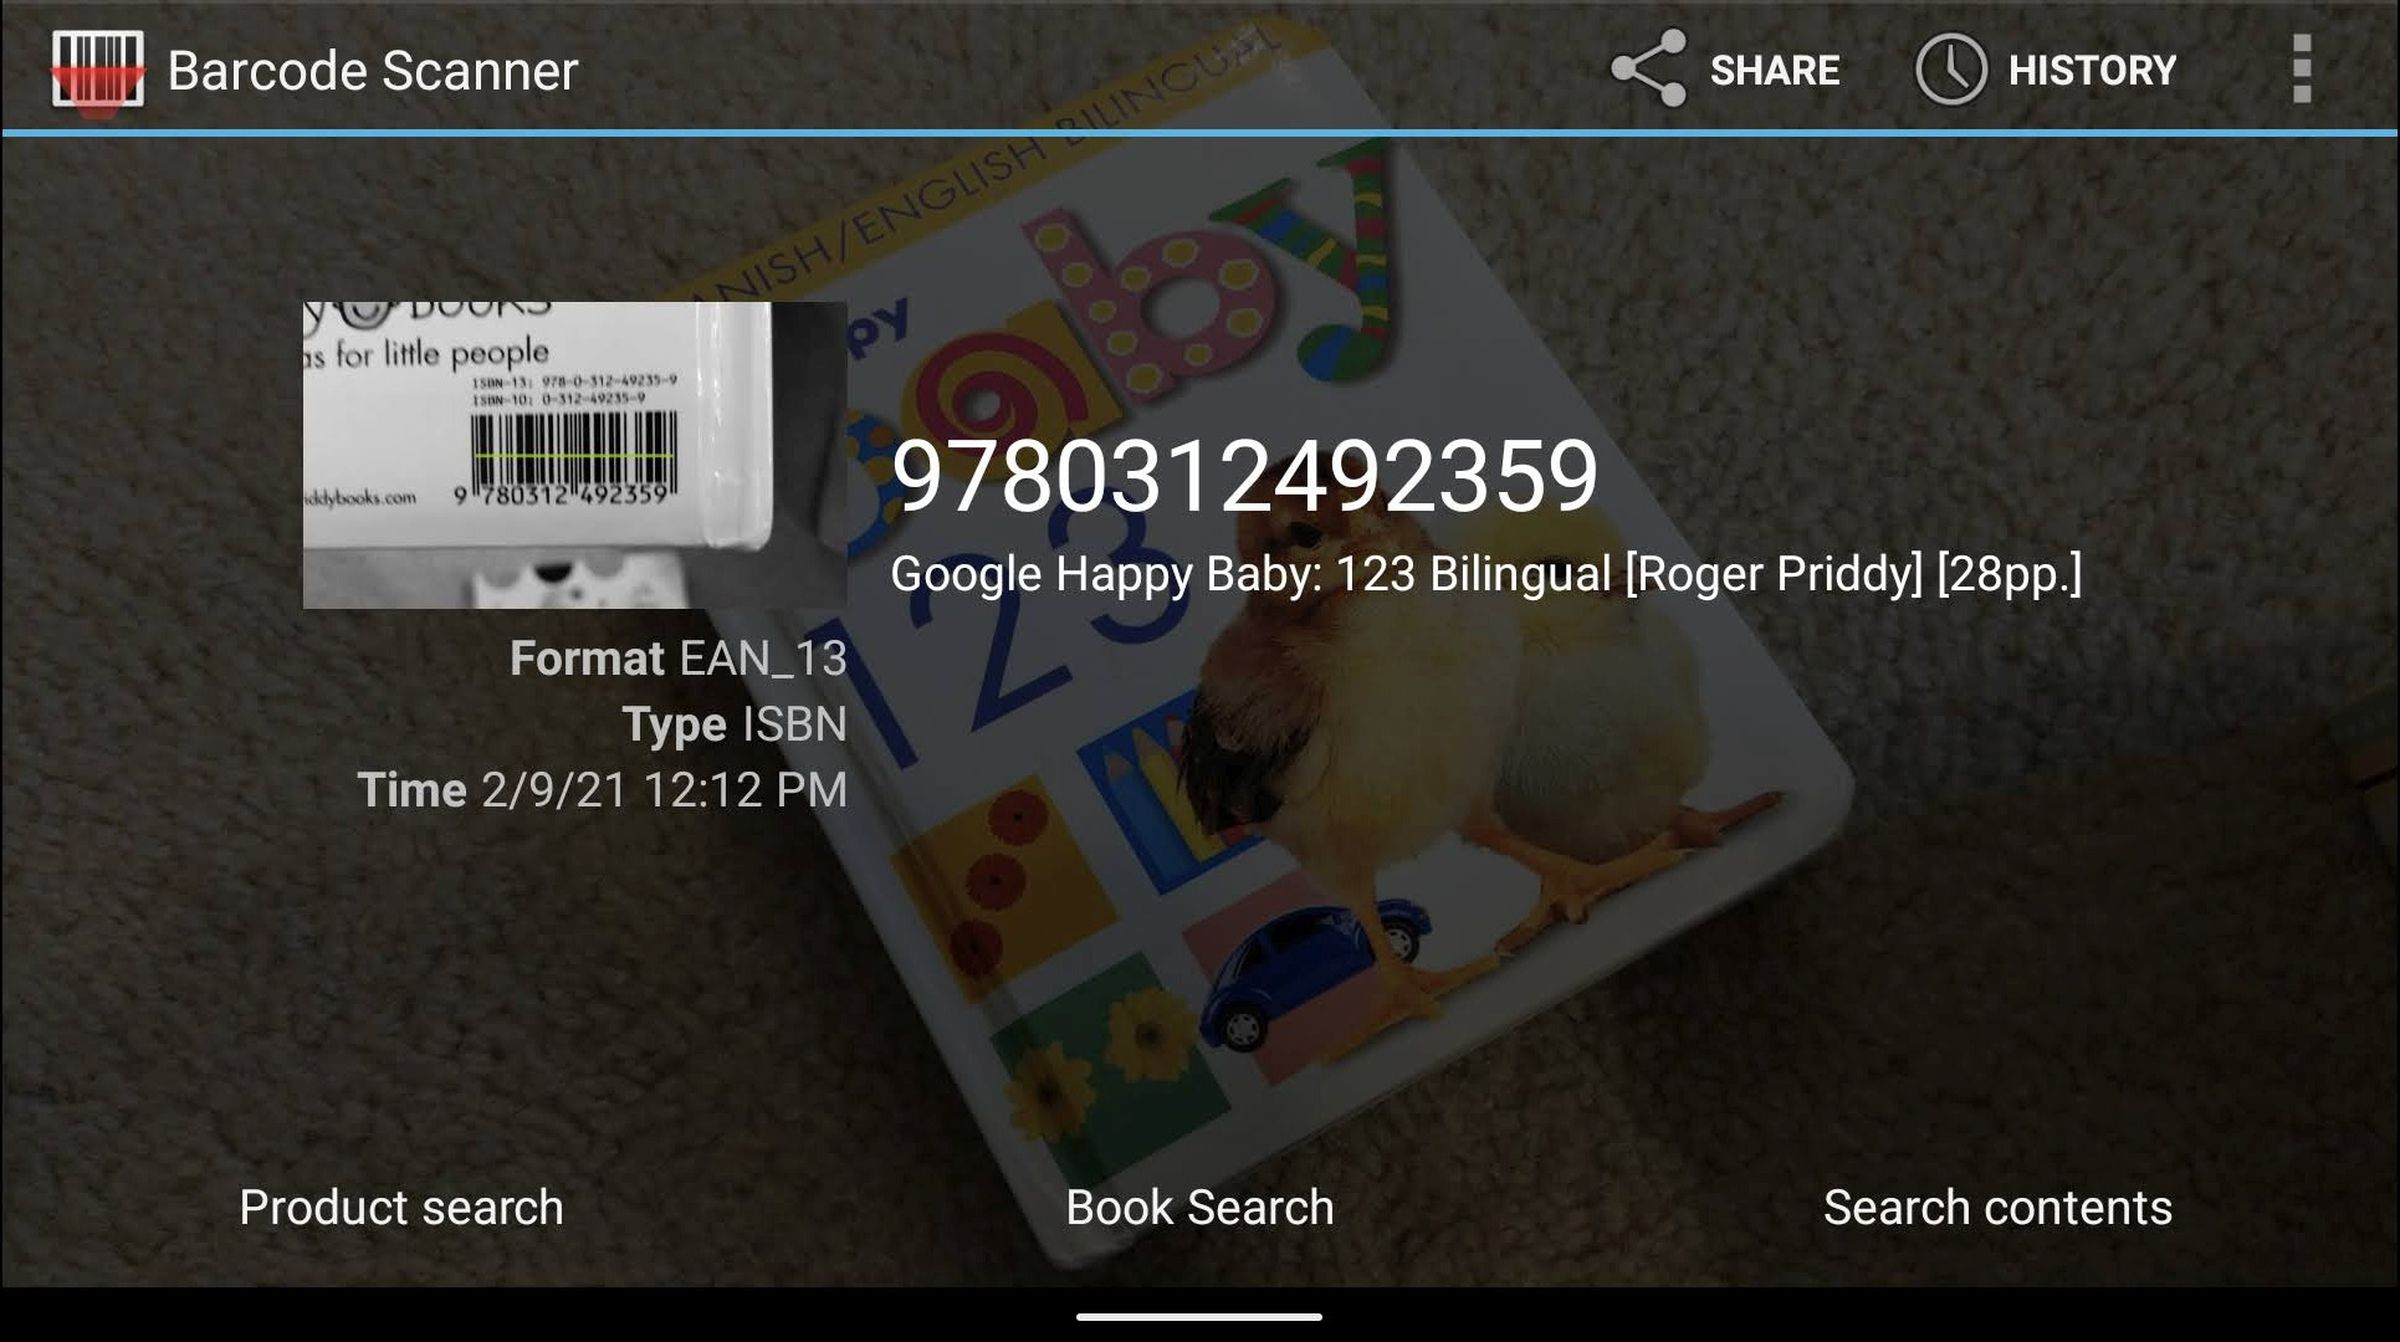 Testing out the original Barcode Scanner app on a modern Android phone. 